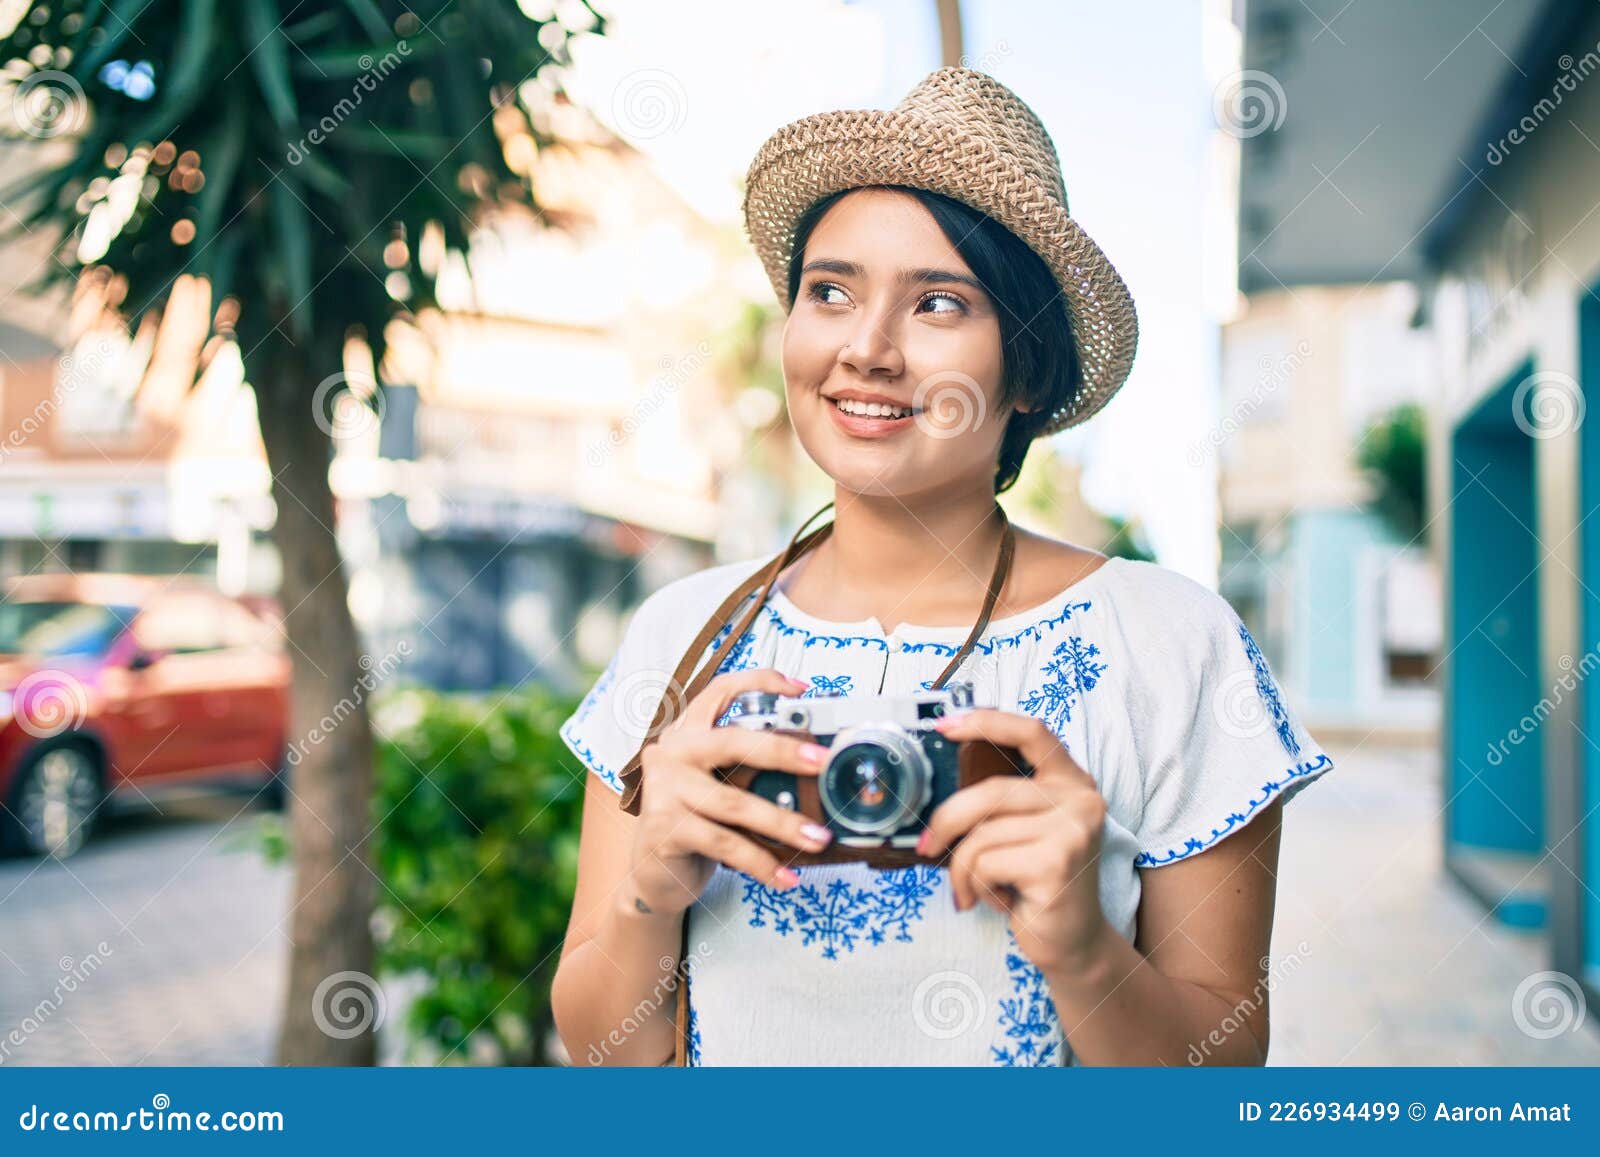 Young Latin Tourist Girl on Vacation Smiling Happy Using Vintage Camera ...